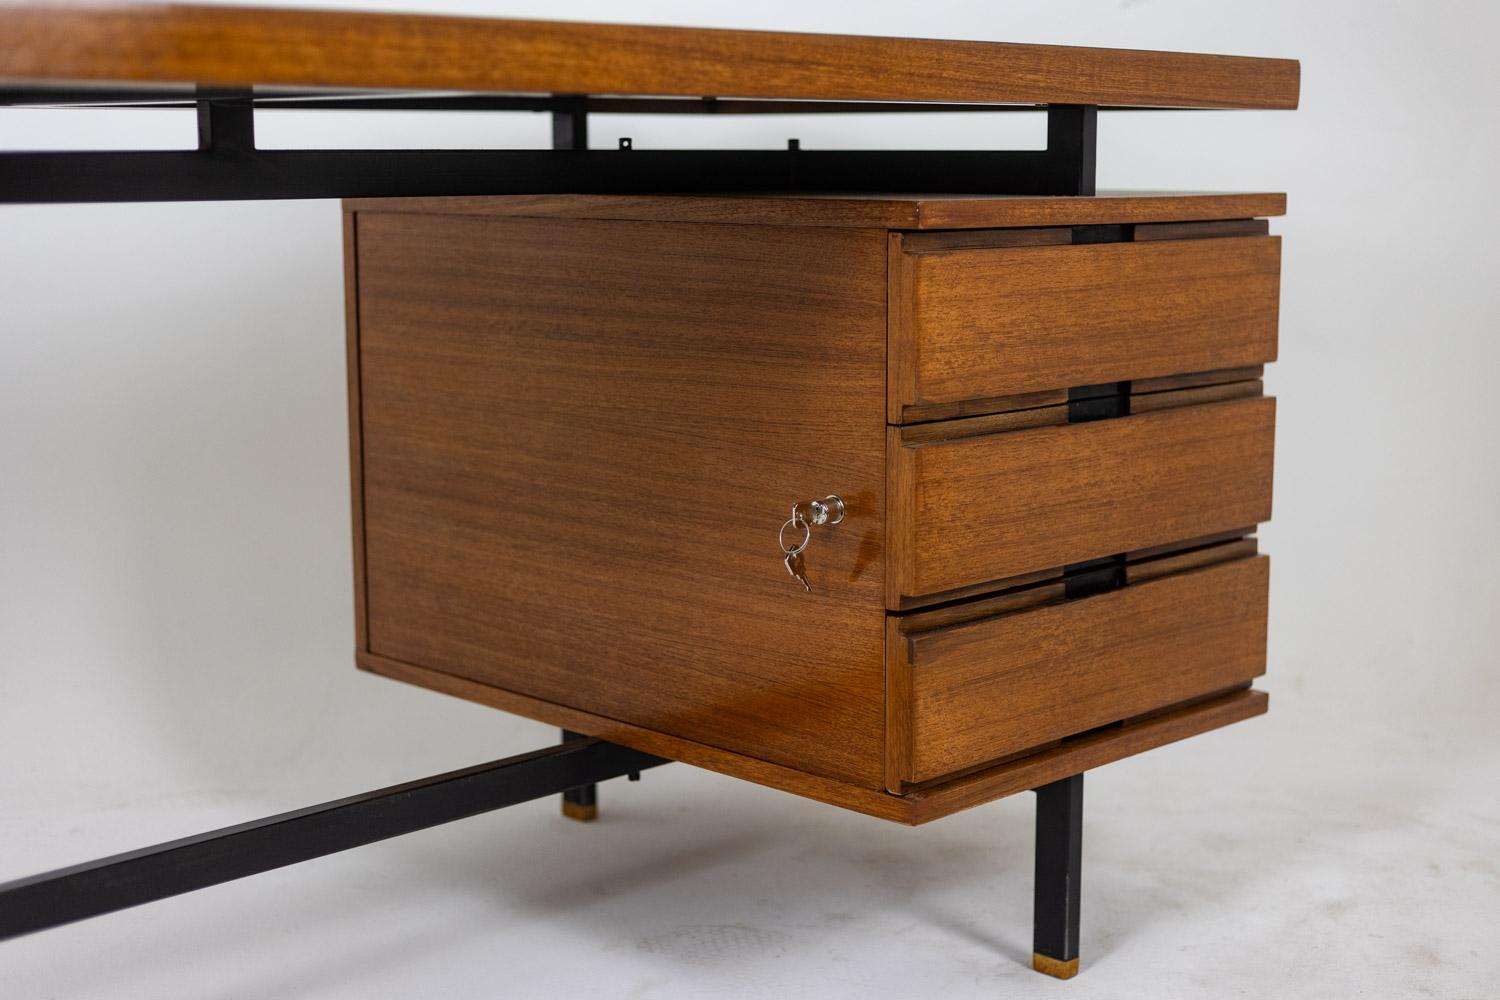 Pierre Guariche. Desk in teak and lacquered metal. 1960s. LS56631534M For Sale 9